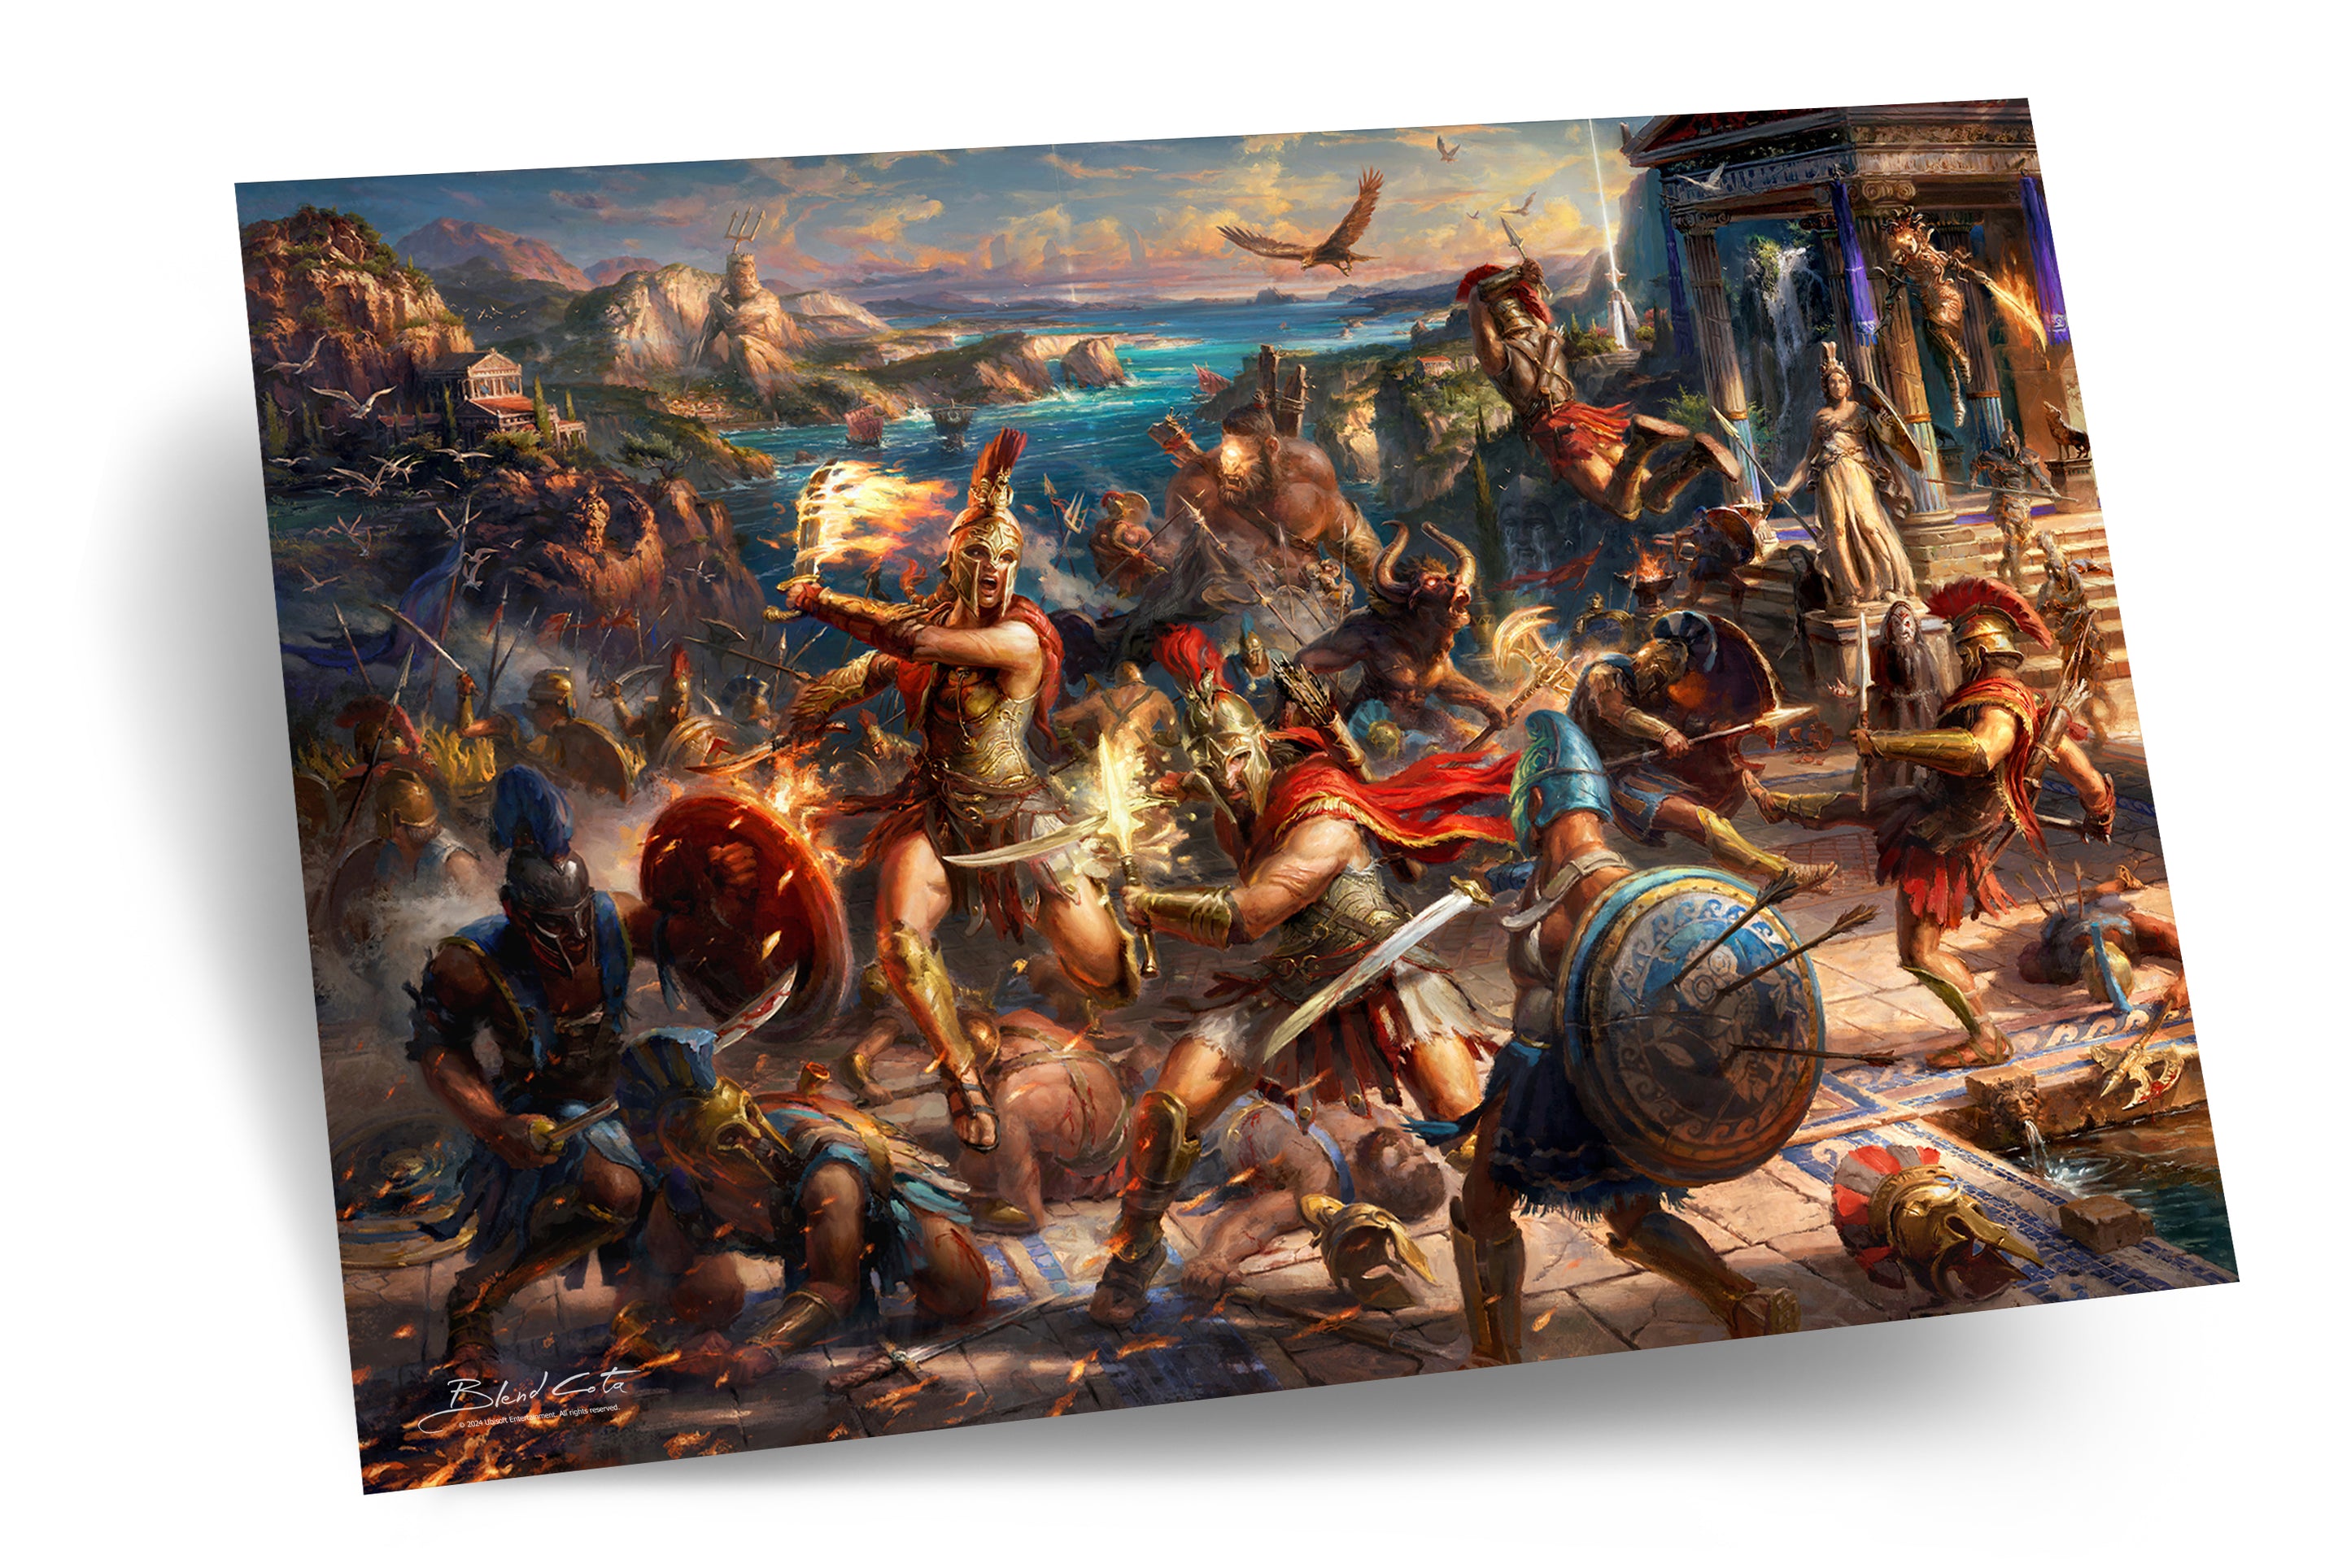 A battle of mythological creatures and Spartan warriors,  from Ubisoft's Assassin's Creed Odyssey with Kassandra and Alexios fighting by a temple in this painting printed on cardstock artist quality paper.